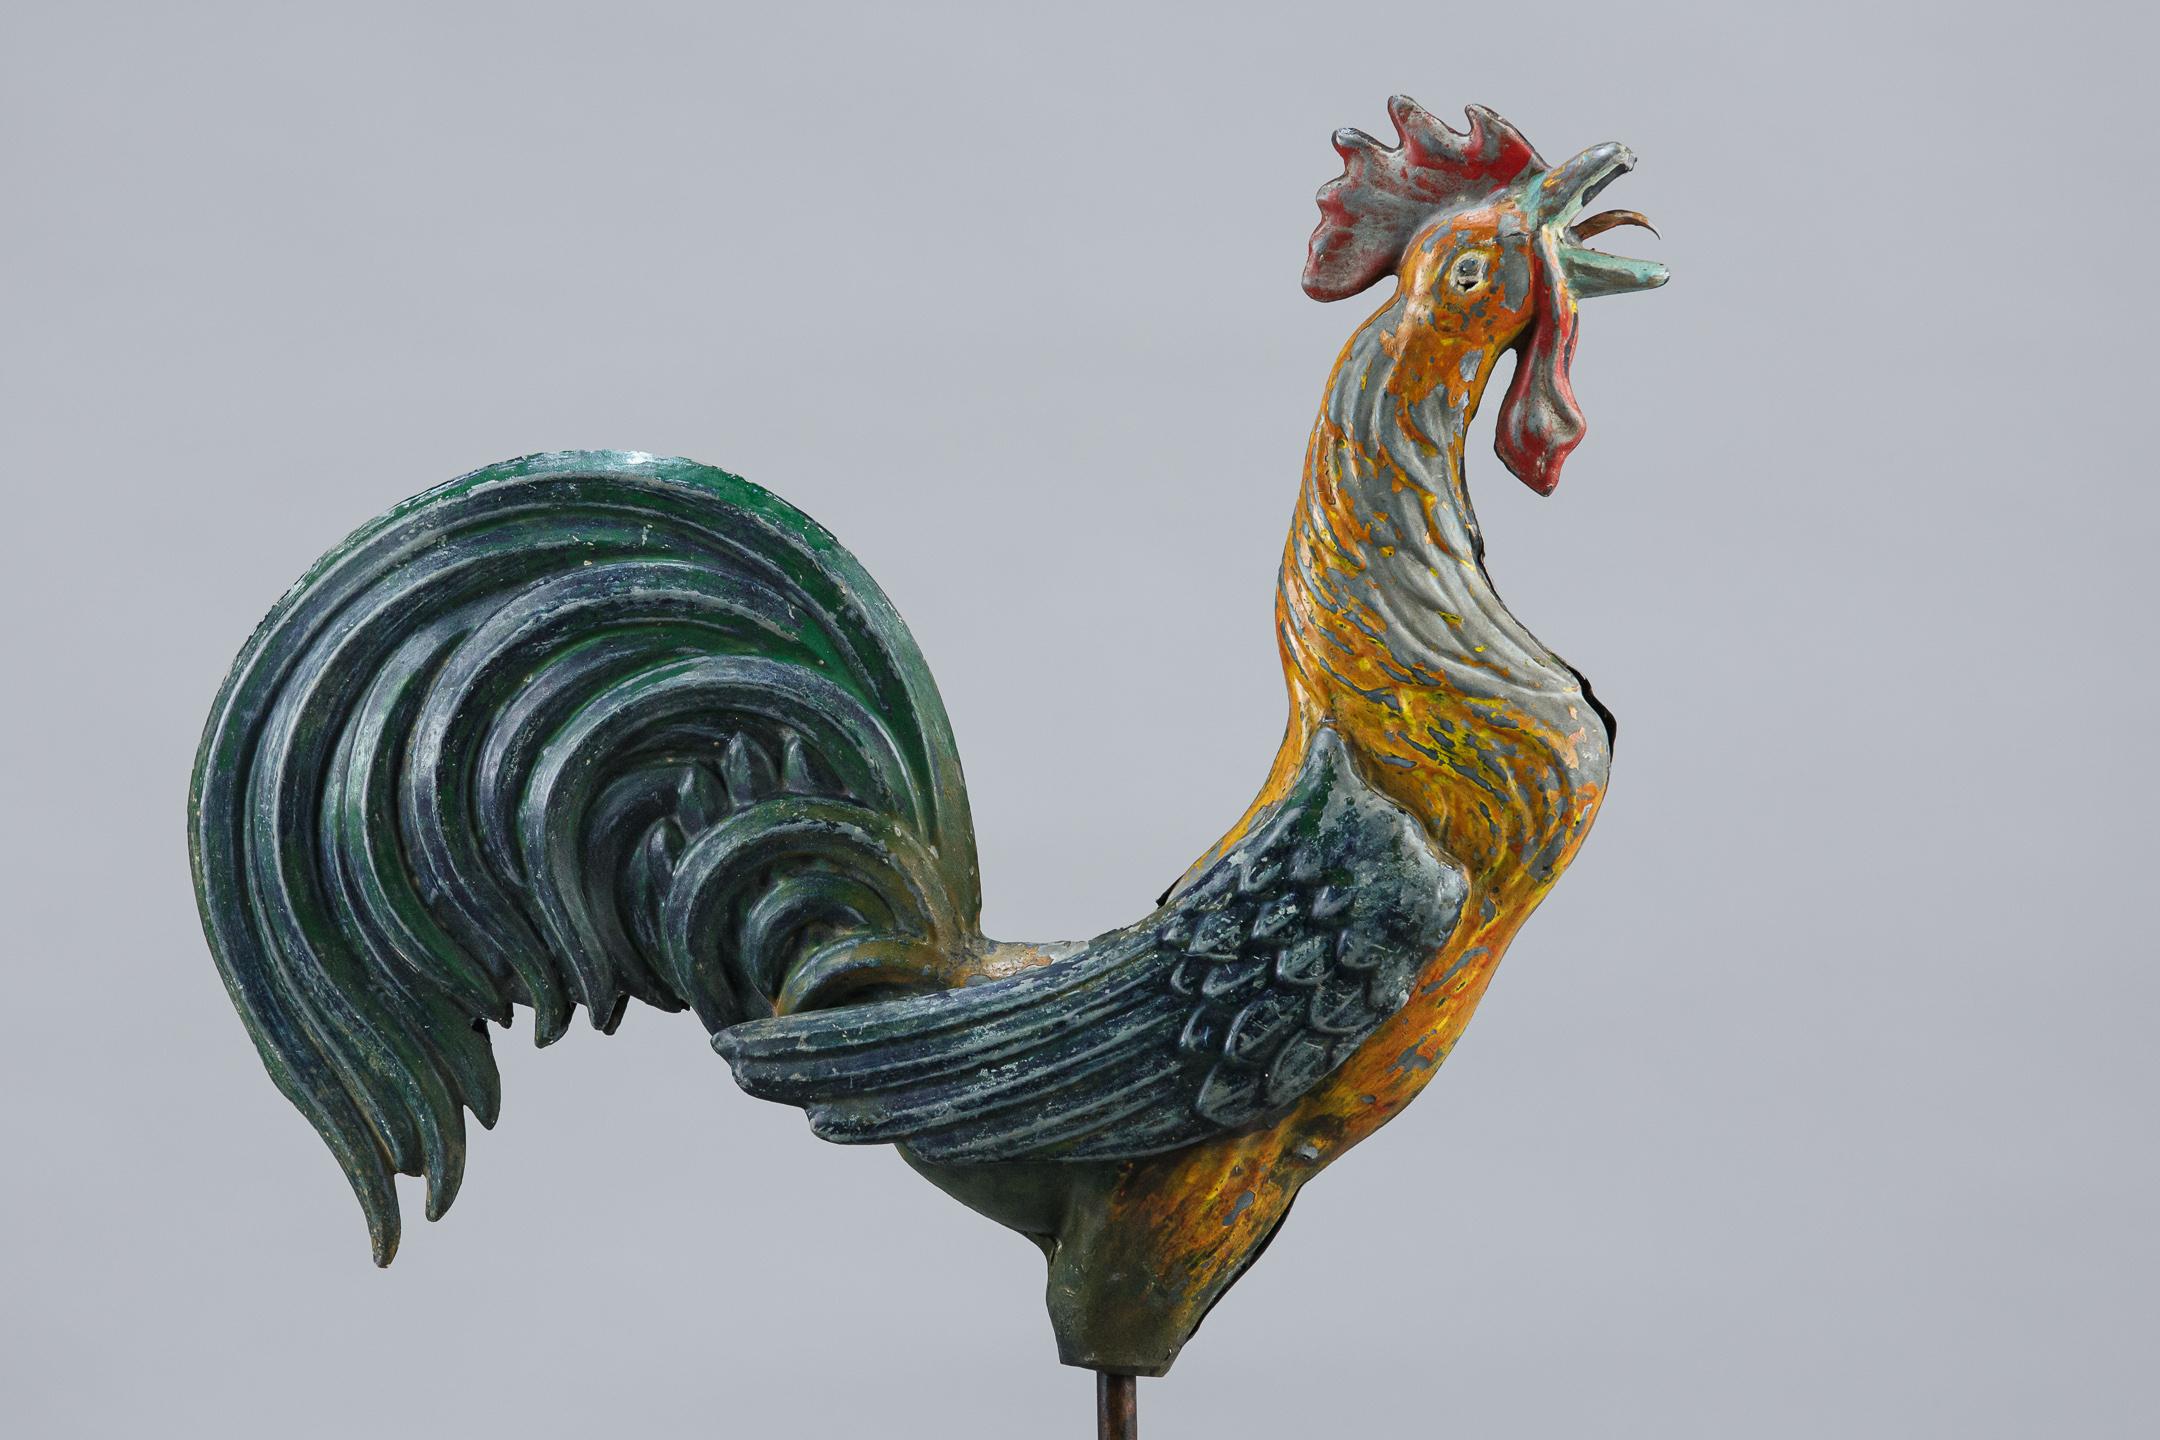 Early 20th century copper cockerel weathervane, original painted finish. mounted to a later stand, some minor damage including a small pellet hole underneath the eye. France Circa 1920. Measurement includes stand.